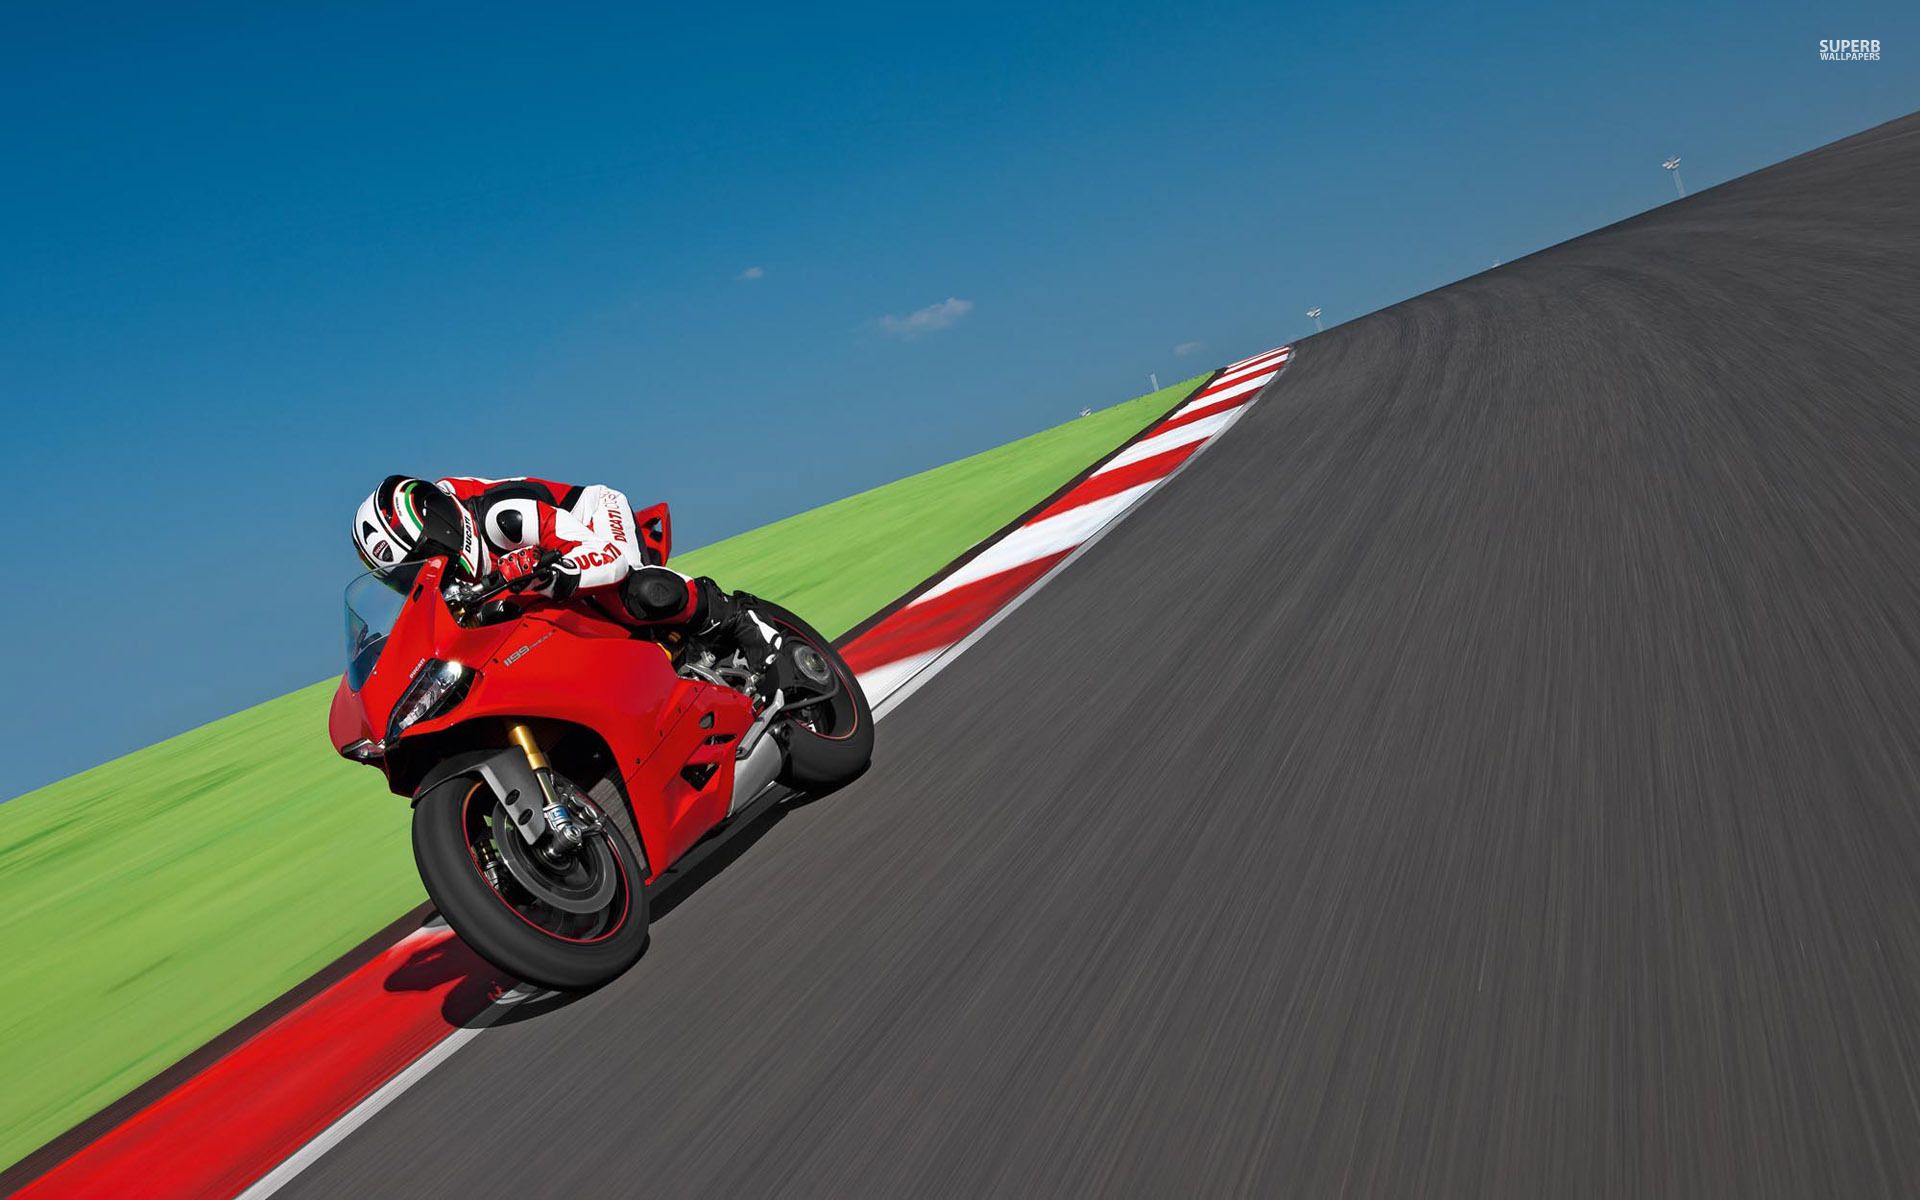 Ducati 1199 Panigale wallpaper - Motorcycle wallpapers - #30147